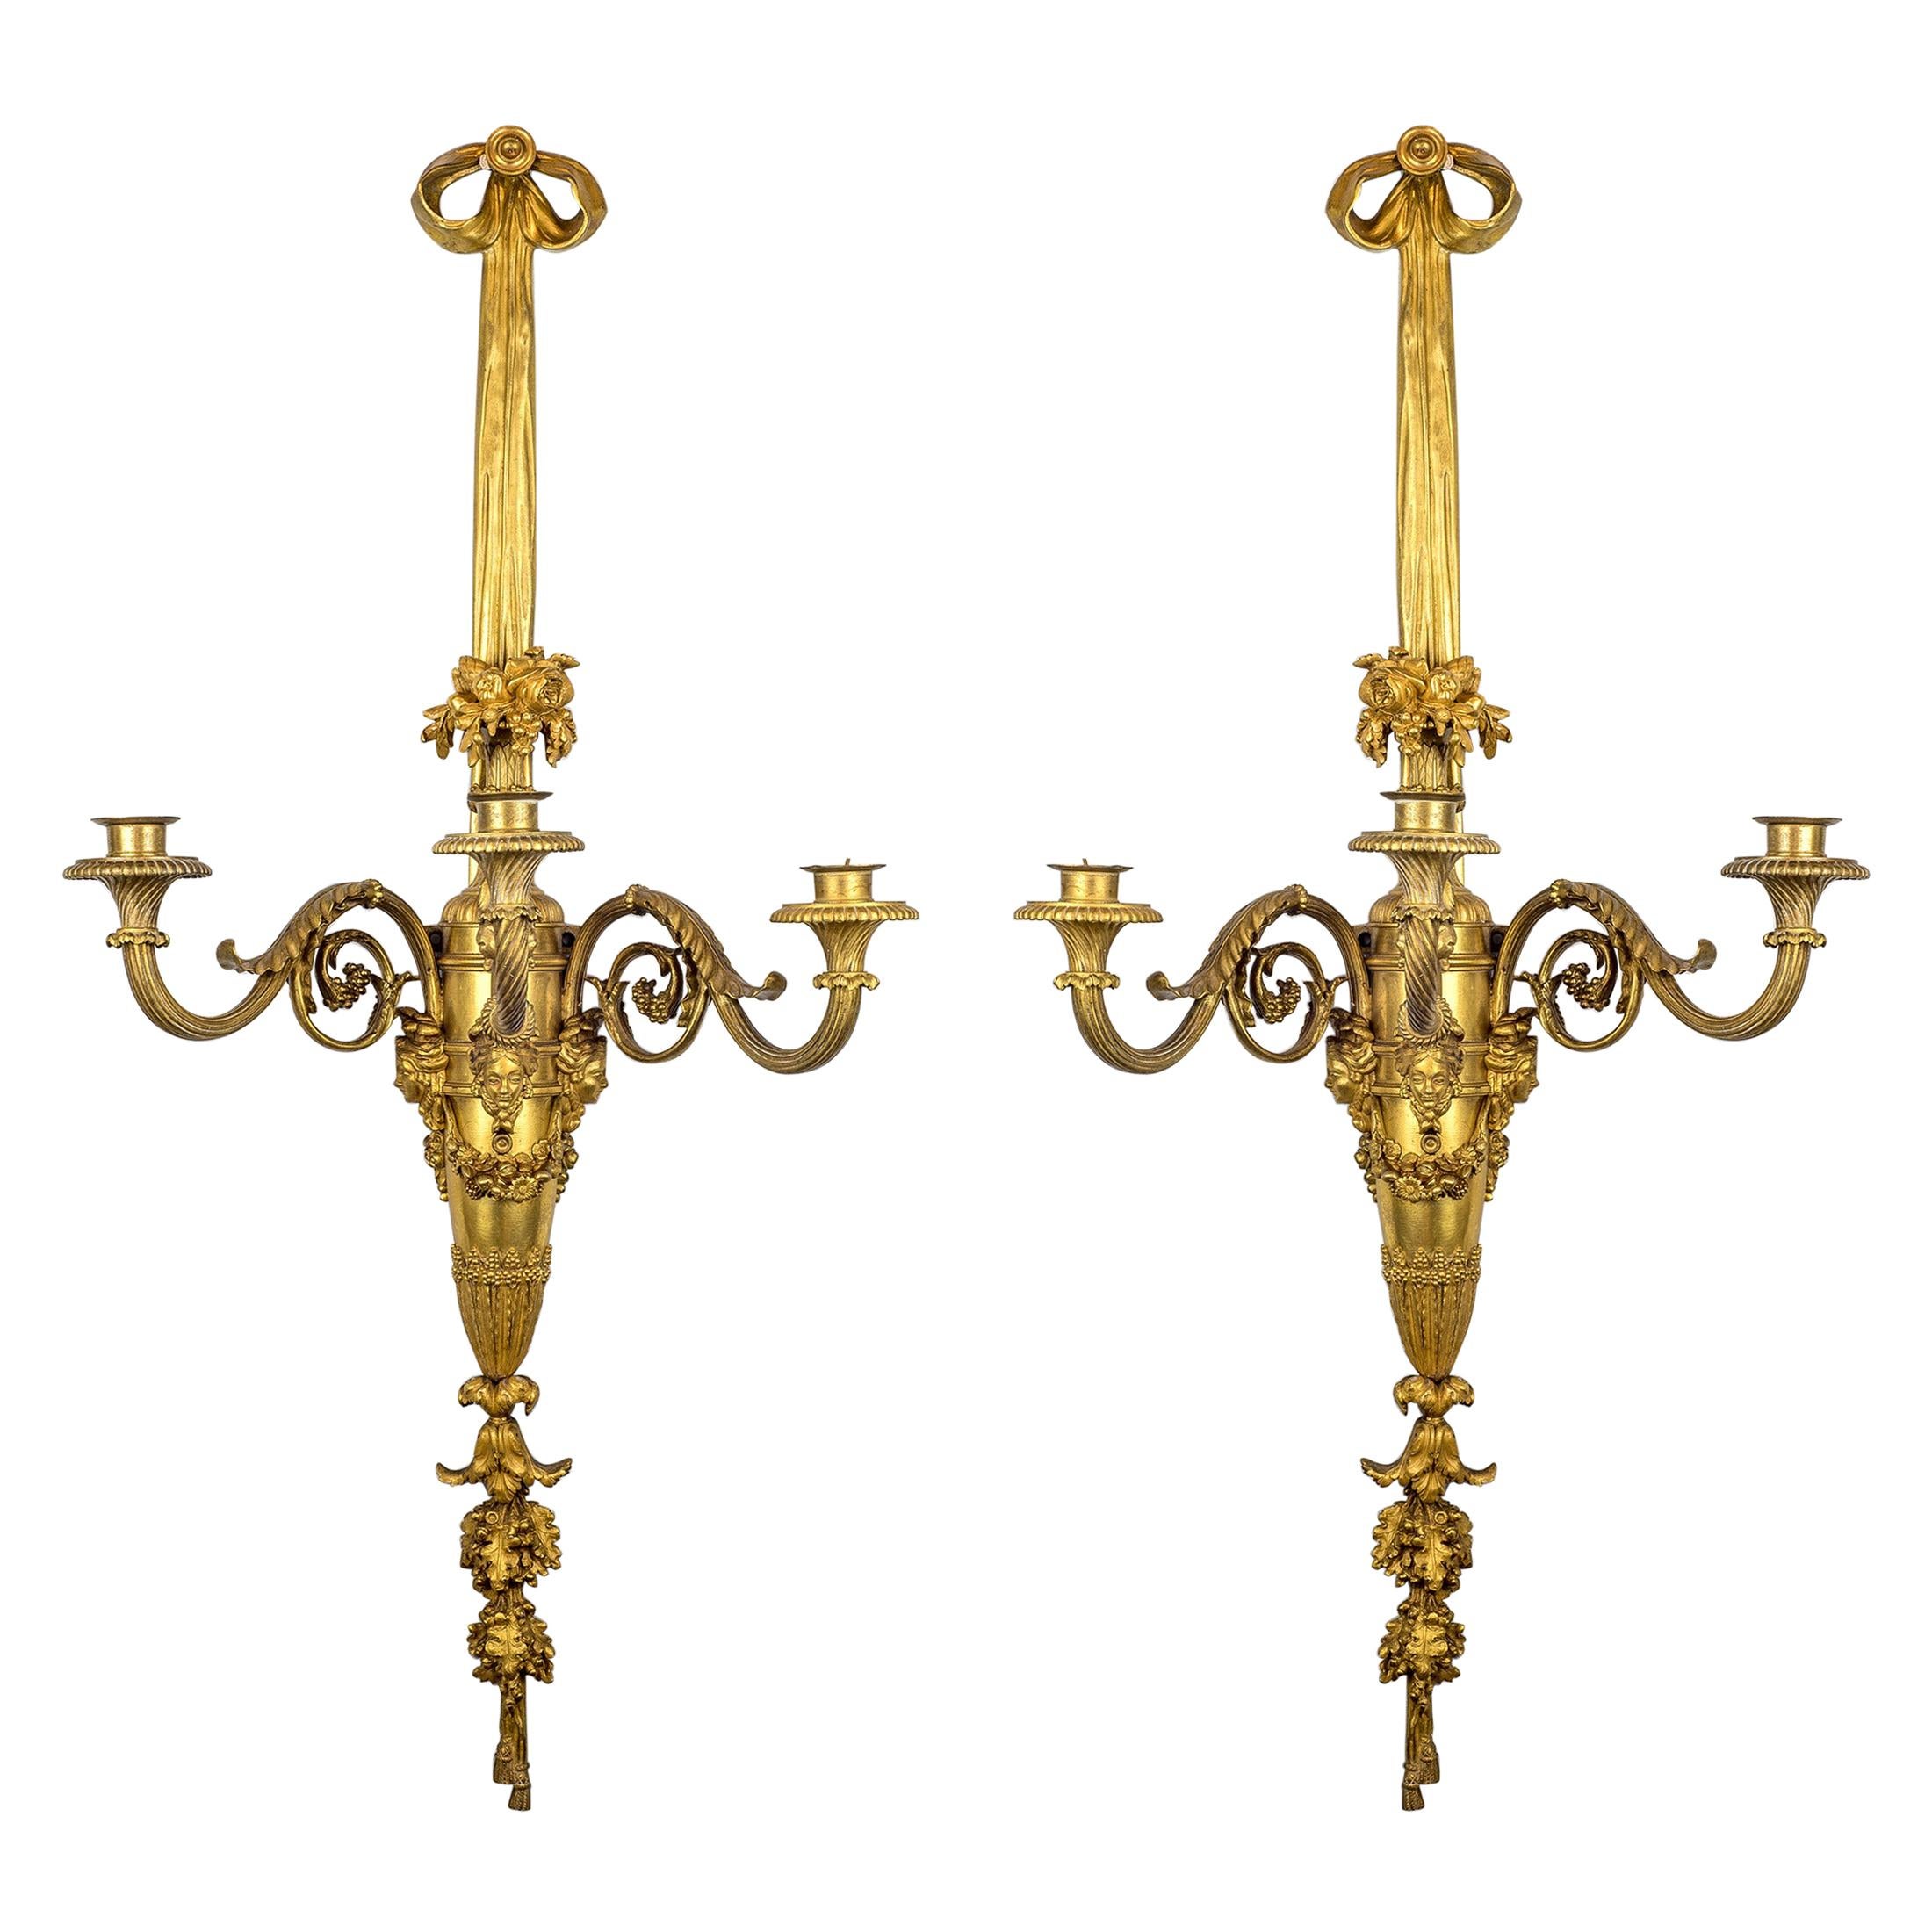 Large and Fine Pair of Henri Vian French Ormolu Three-Light Wall Light Sconces